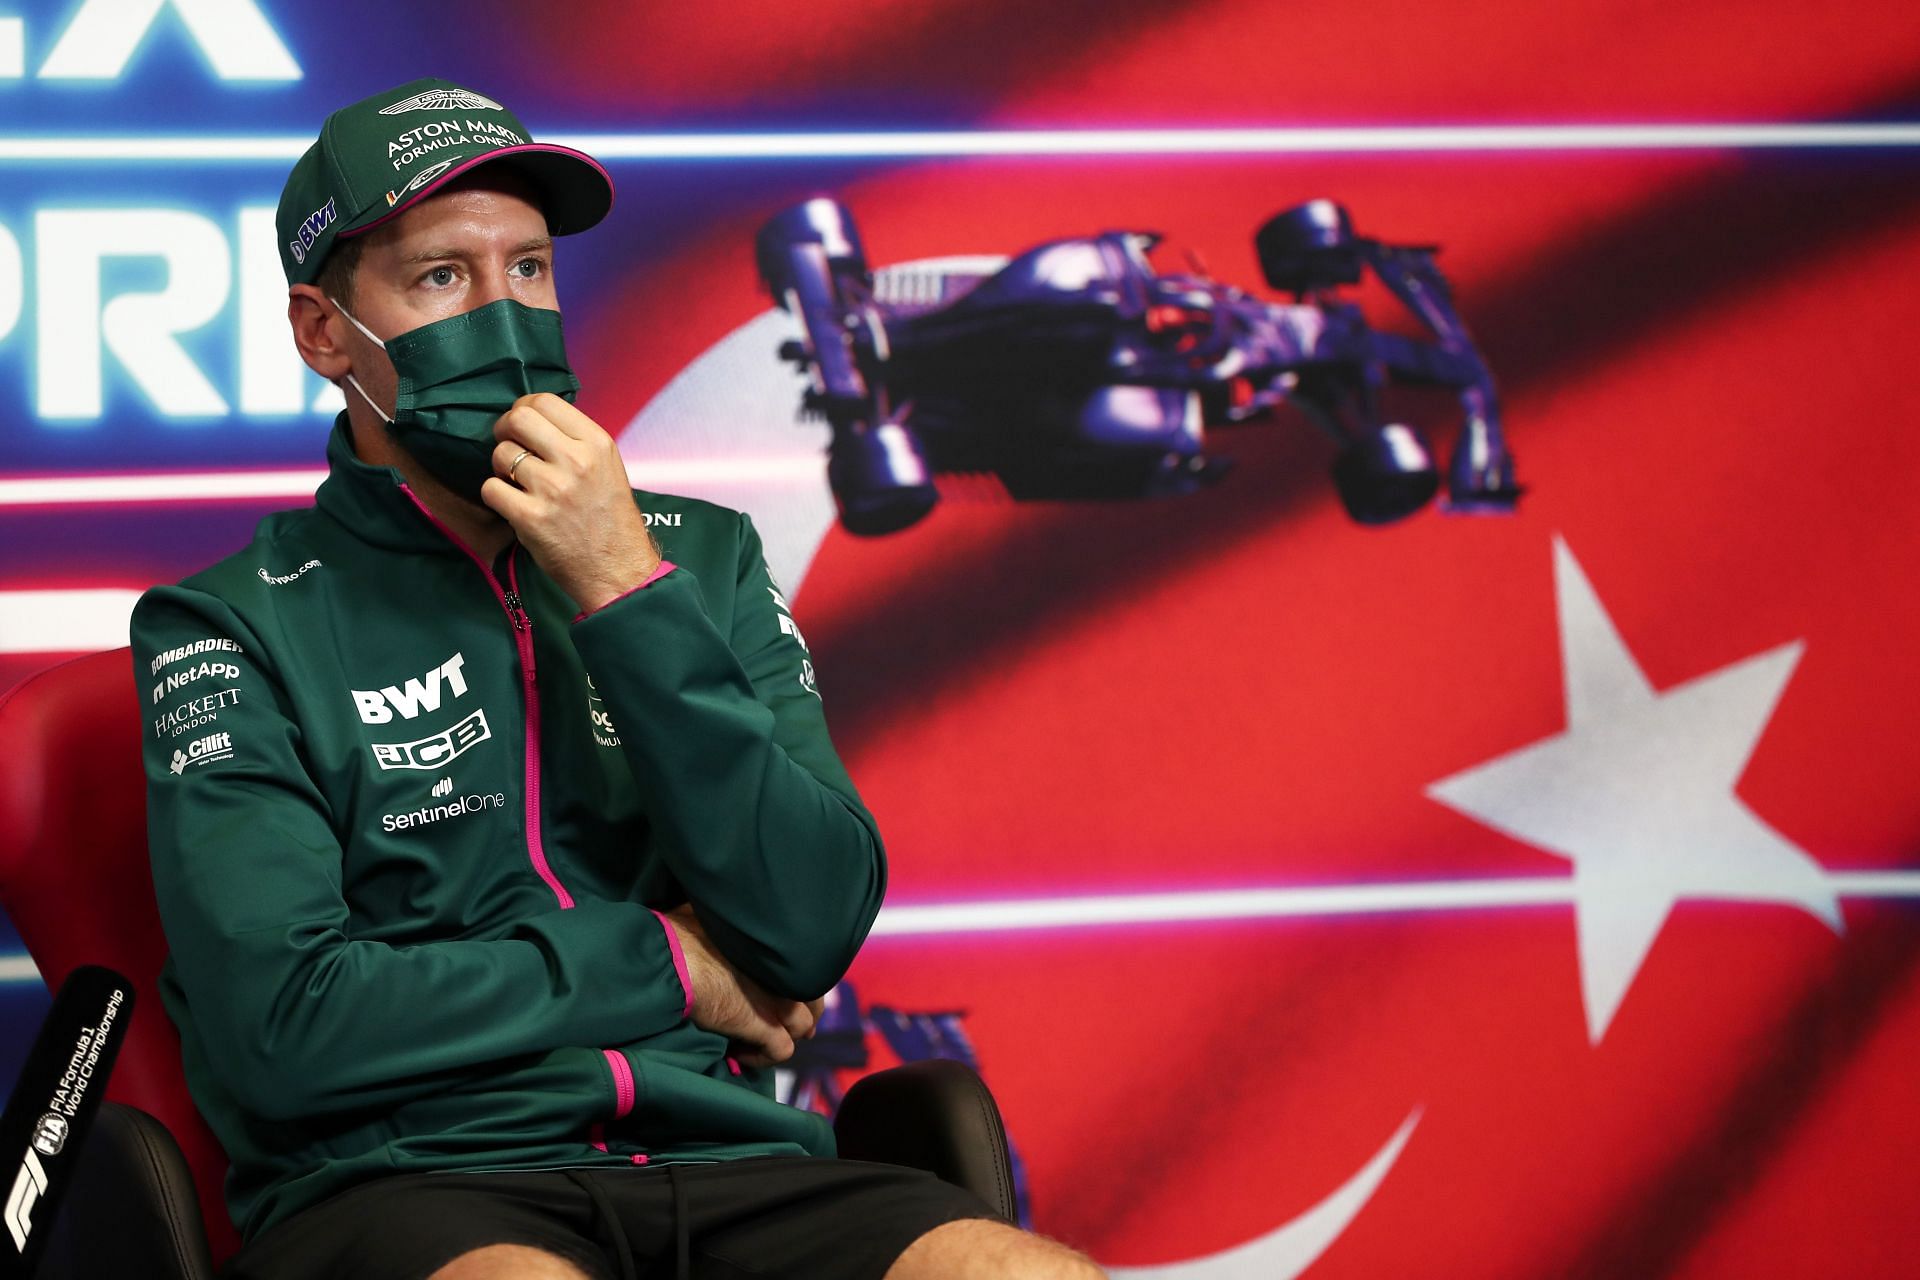 Sebastian Vettel feels the role as a Sky pundit would be the easiest next logical step once he retires. Photo: Mark Thompson/Getty Images